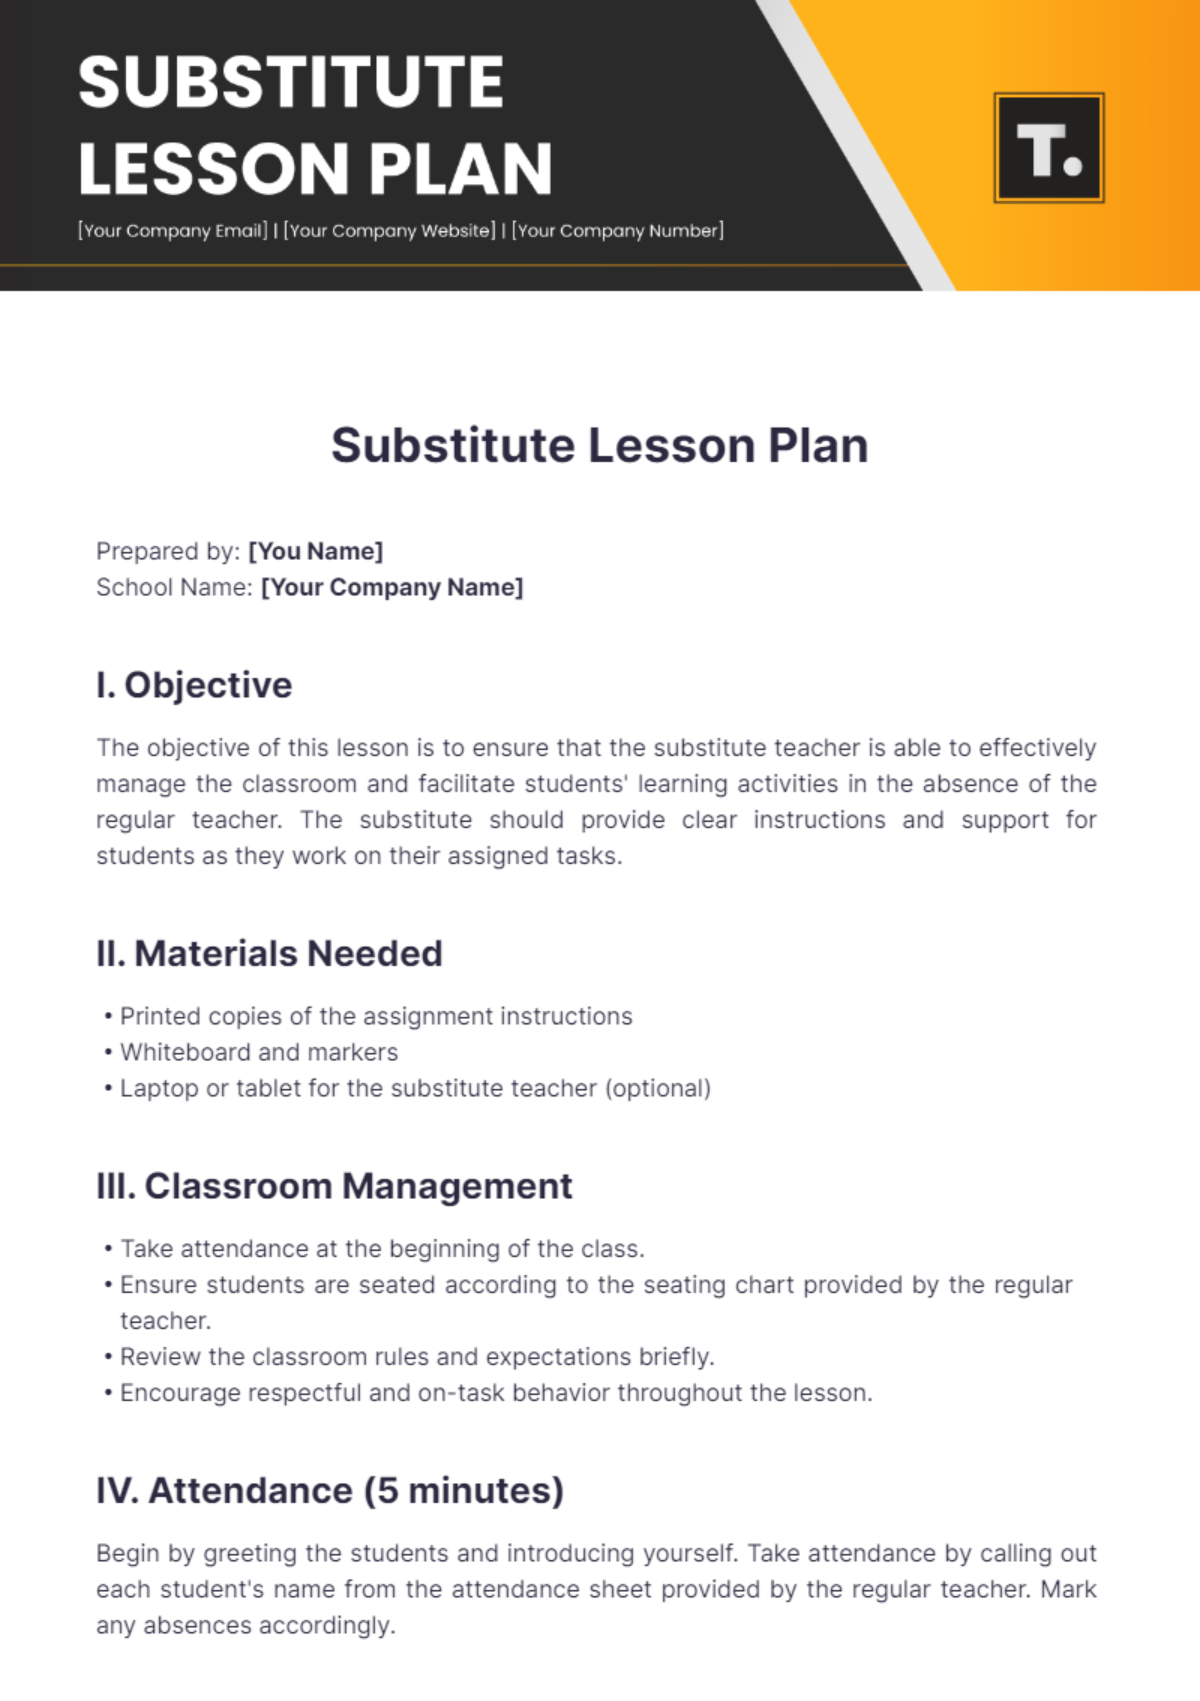 Free Substitute Lesson Plan Template